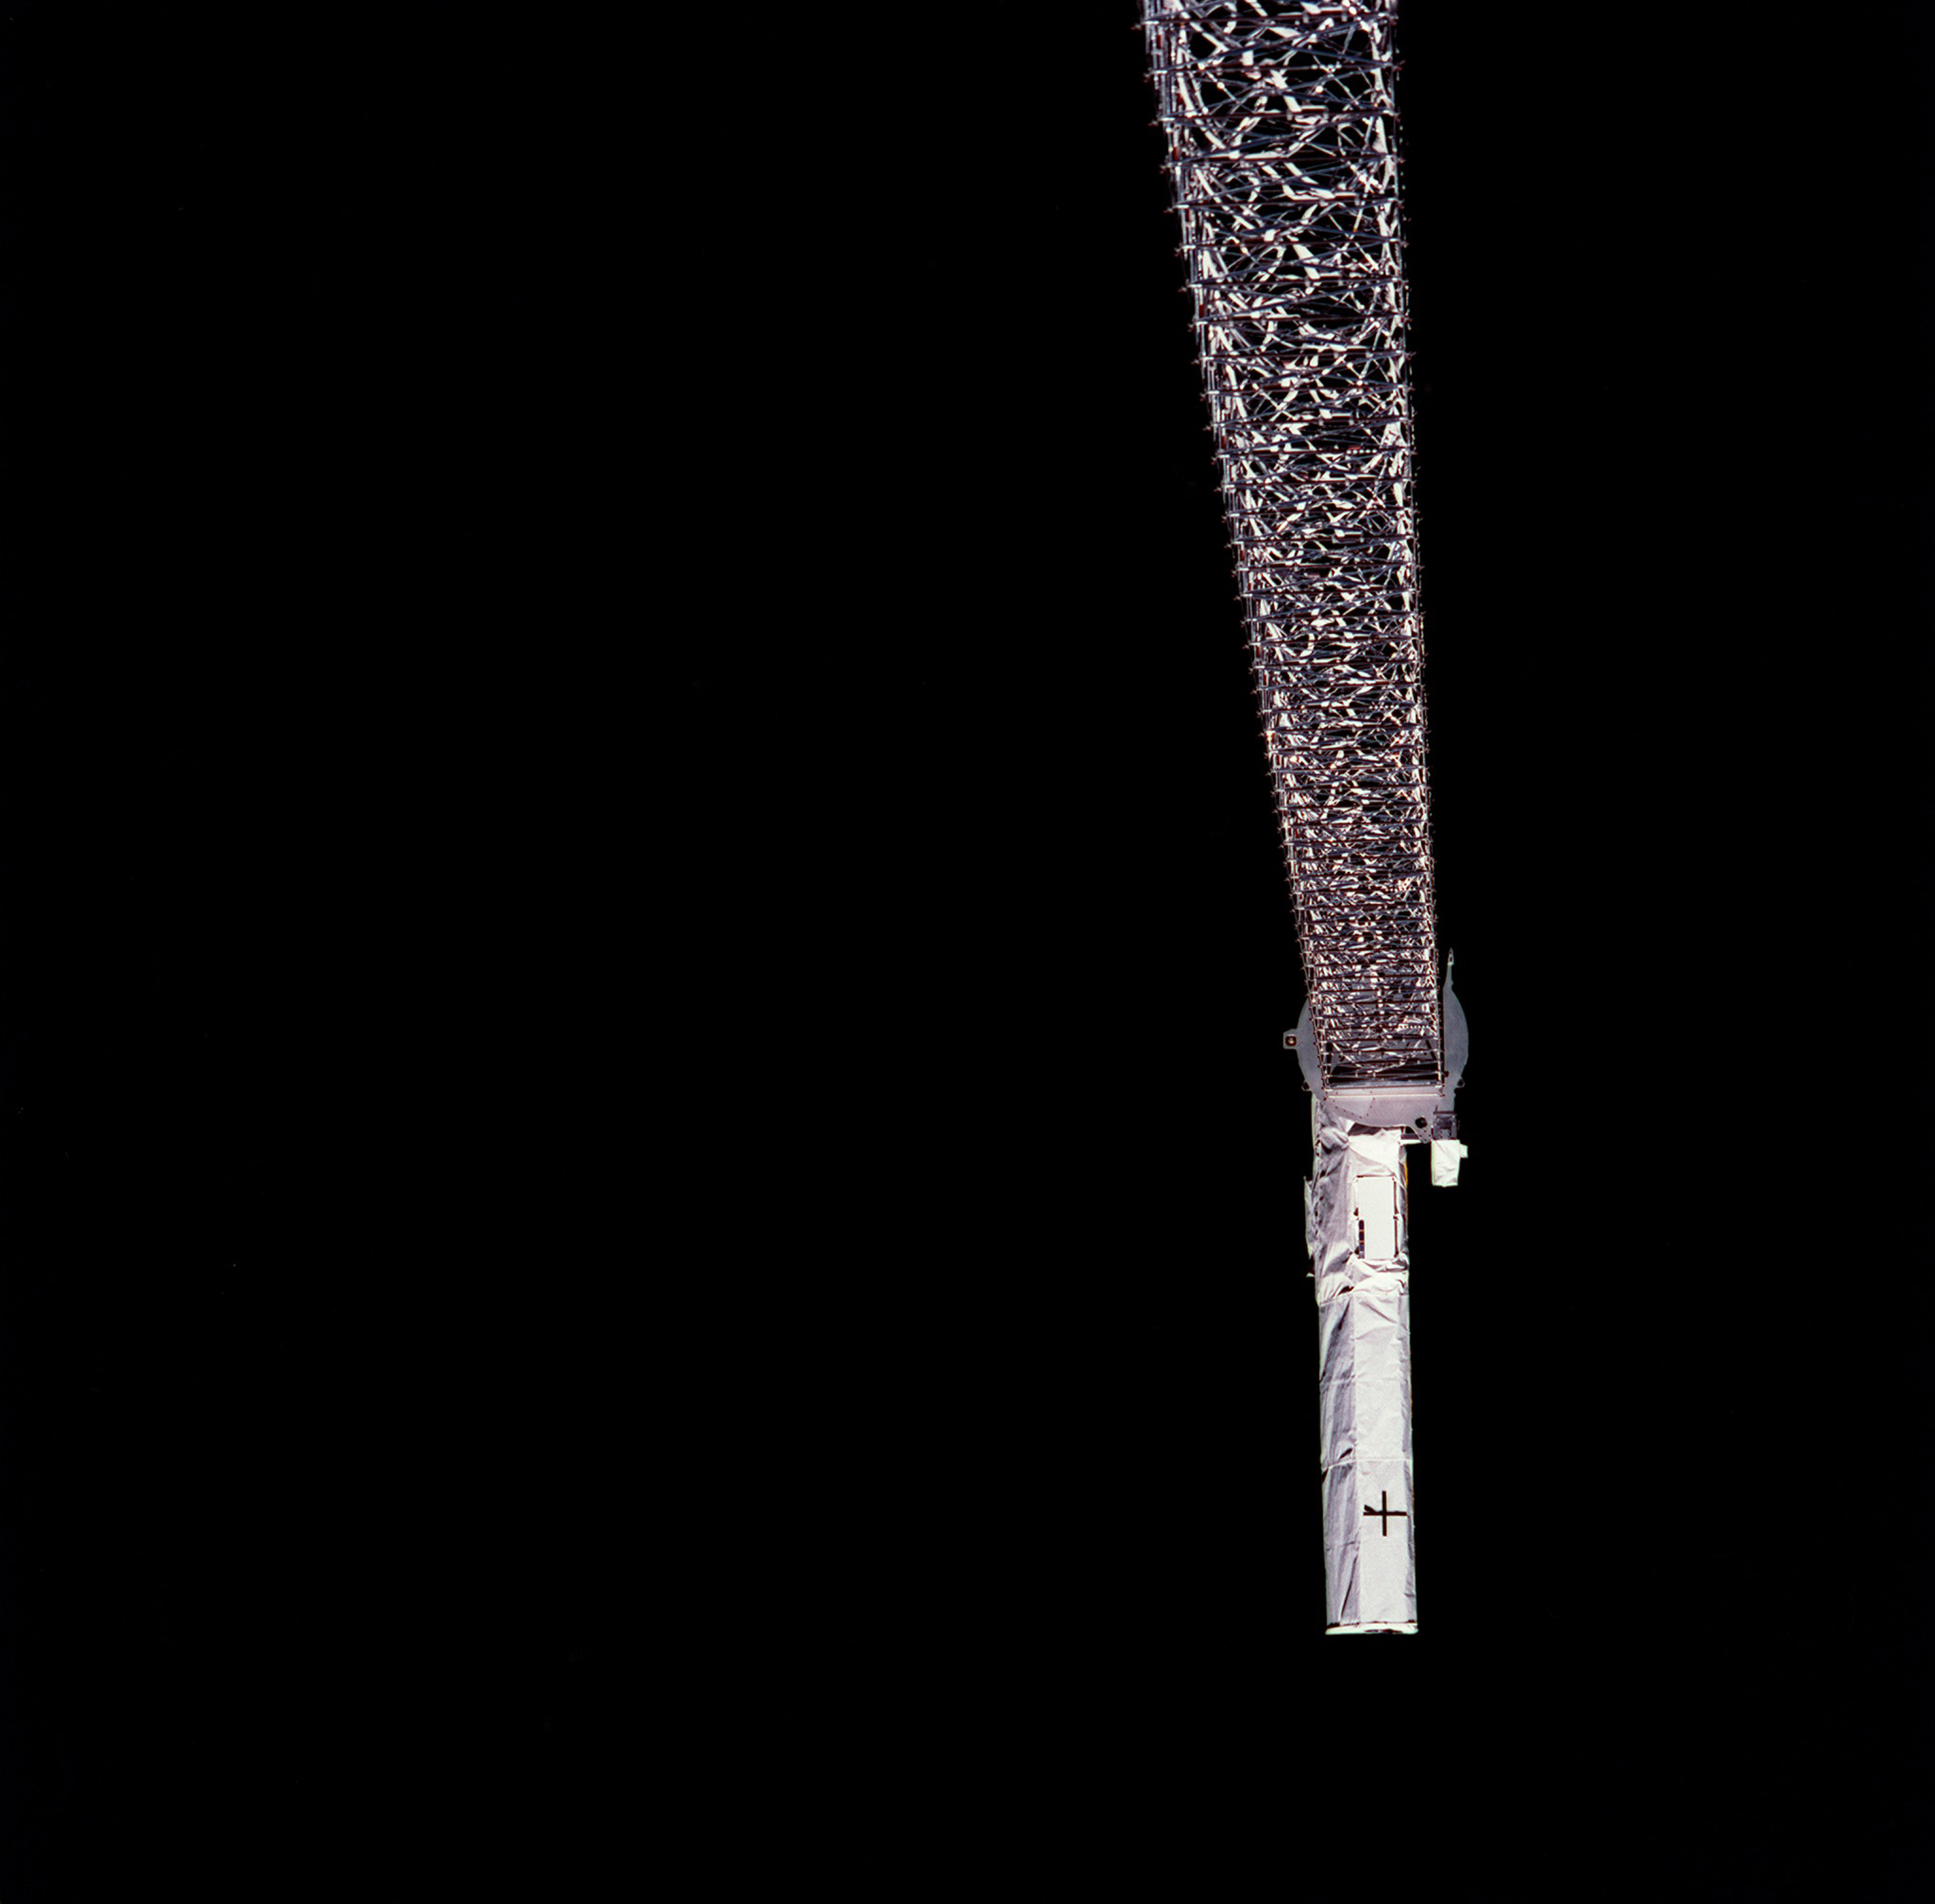 File:Mast Supporting the Shuttle Radar Topographic Mission (SRTM.